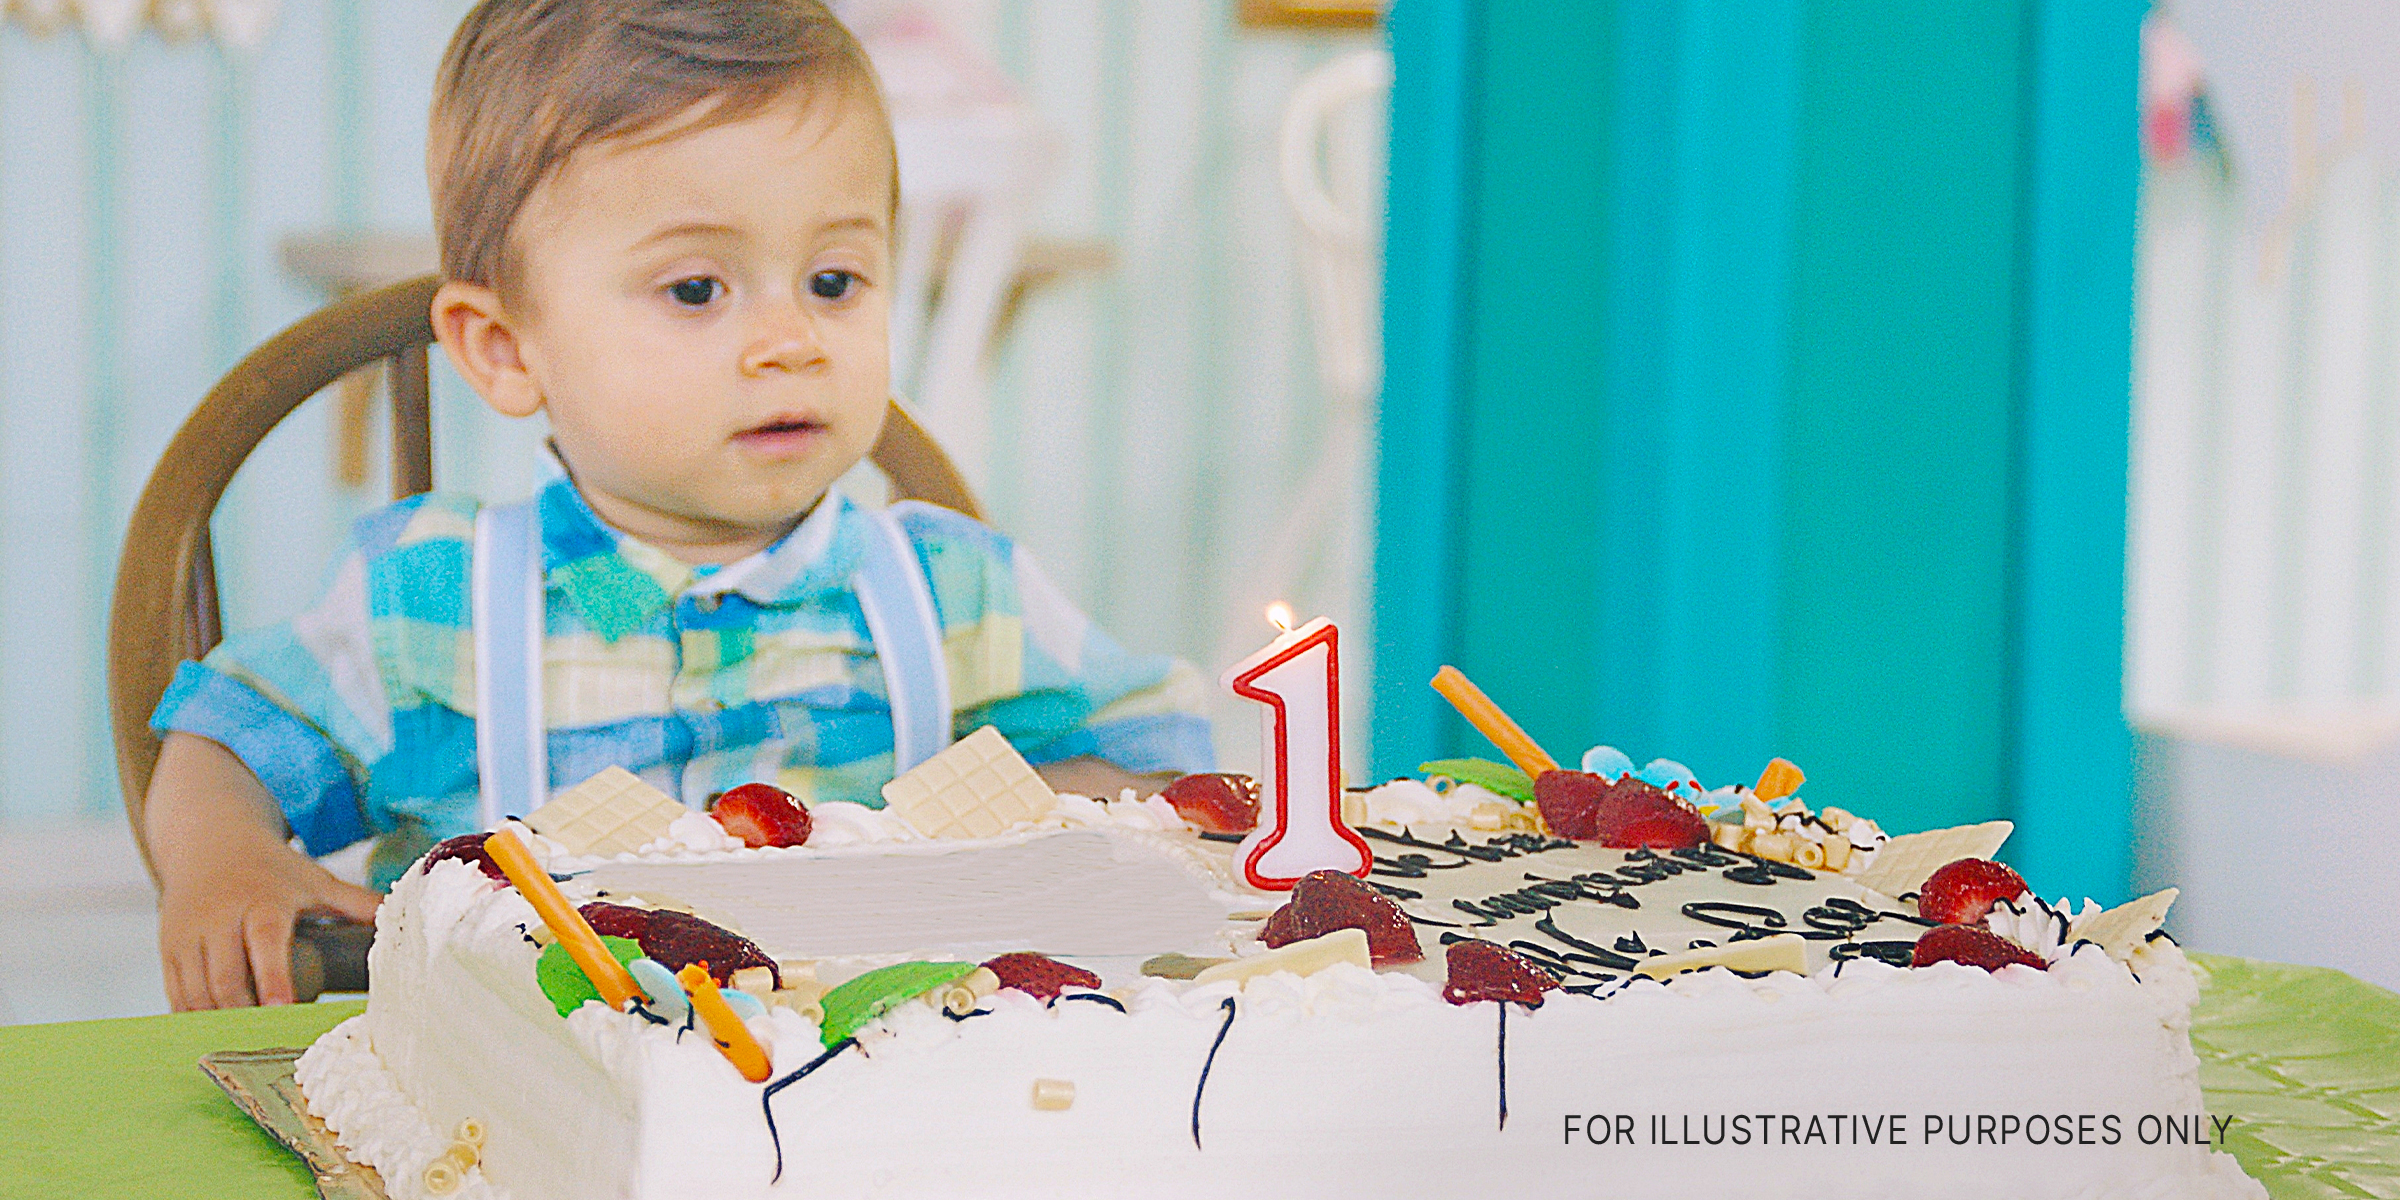 A toddler sitting at a table ready to blow out a candle on his birthday cake | Source: Getty Images